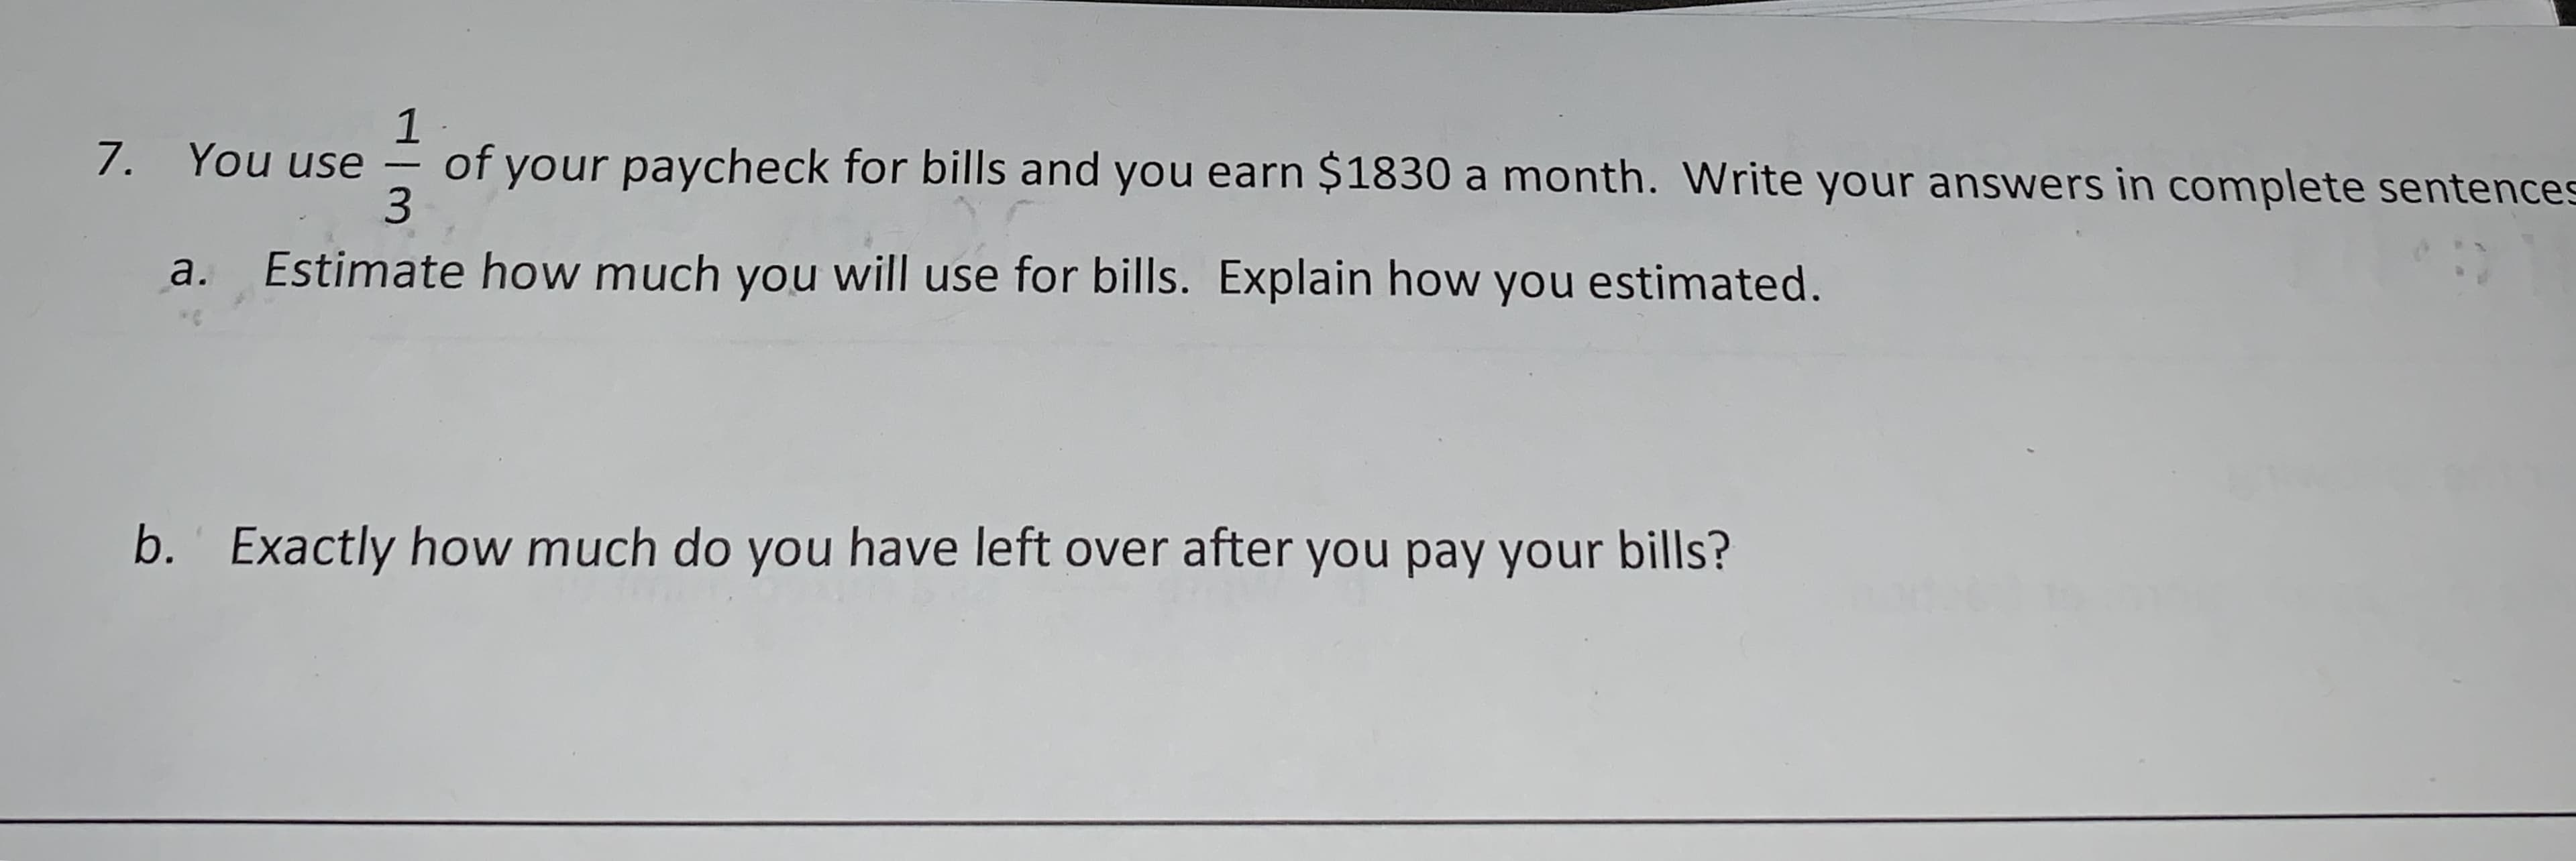 1
of your paycheck for bills and you earn $1830 a month. Write your answers in complete sentences
3
7. You use
Estimate how much you will use for bills. Explain how you estimated.
a.
*C
Exactly how much do you have left over after you pay your bills?
b.
